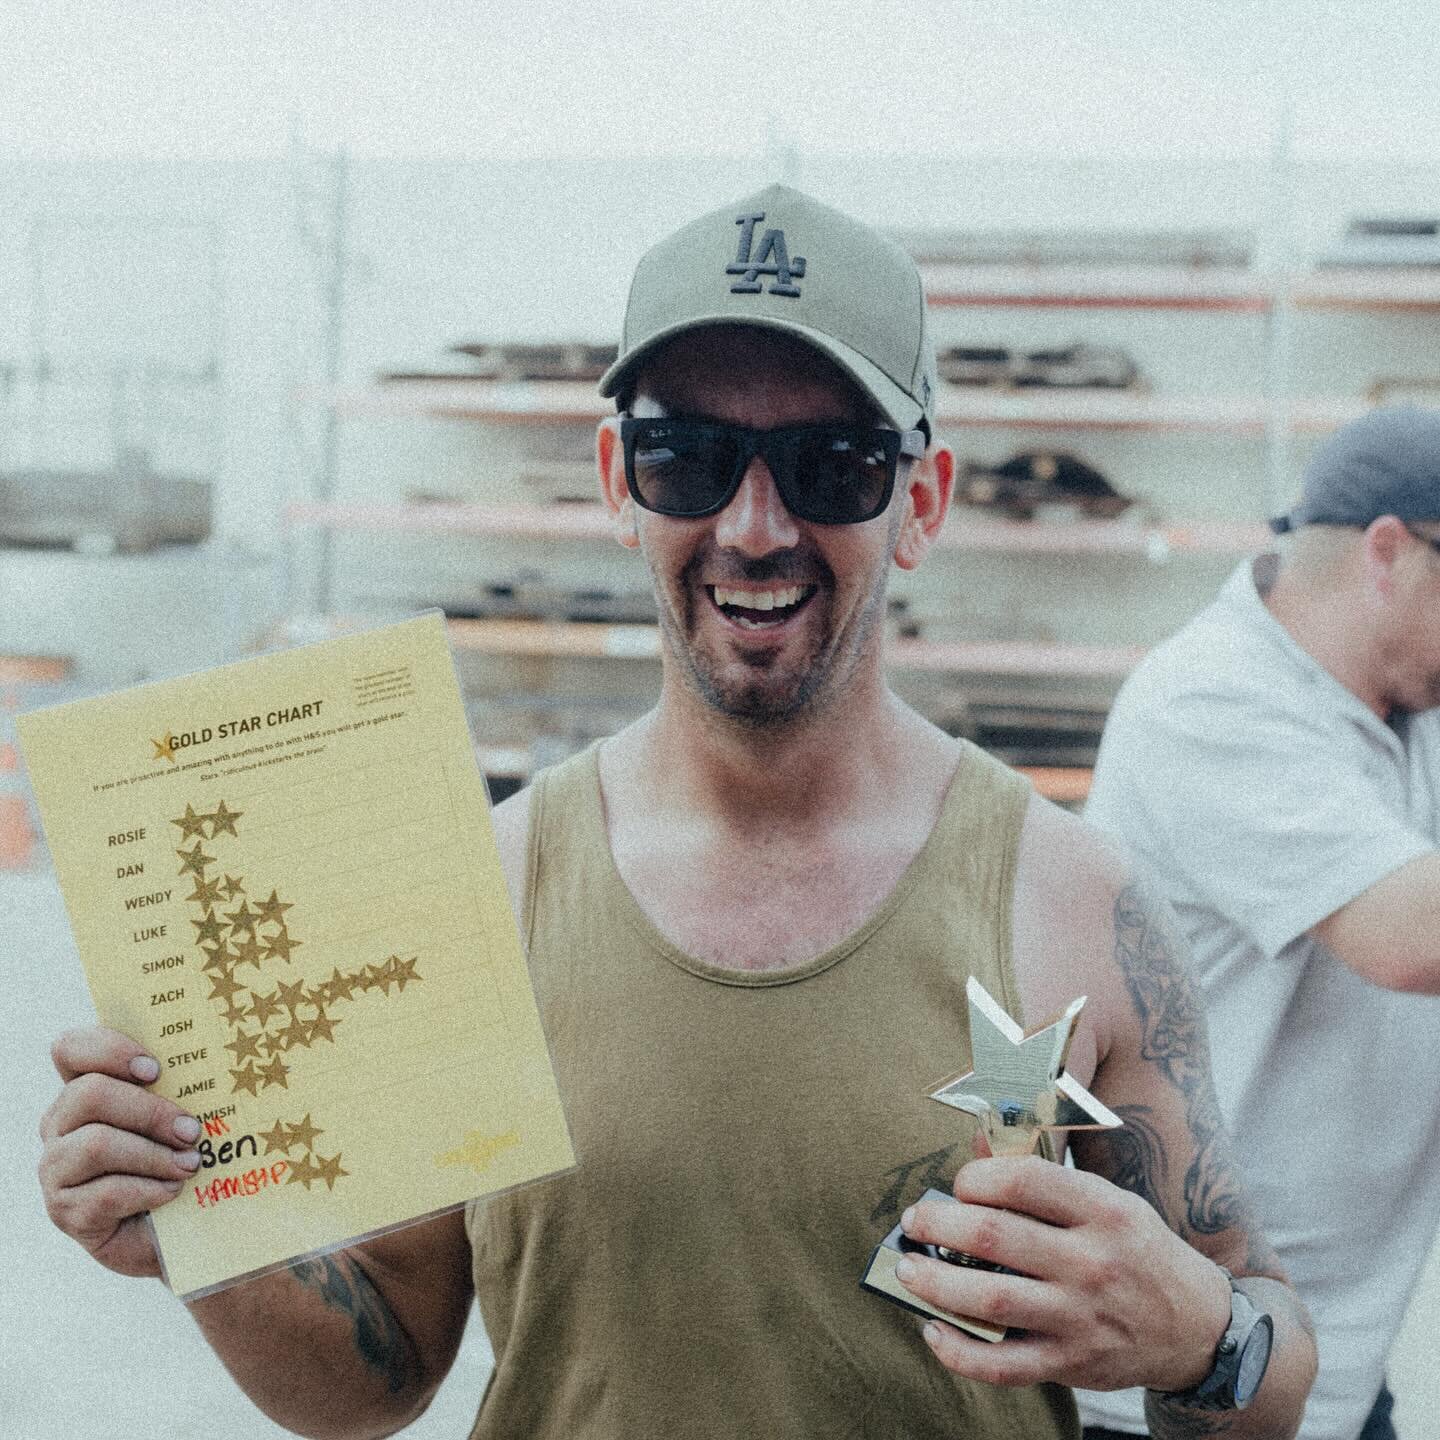 Because taking Health&amp;Safety seriously doesn&rsquo;t have to be boring: The Engineering Co. Health &amp; Safety Awards 2023.

The Gold Star Award 🌟 went to 2Stroke, he&rsquo;s kind of a big deal. @josh.pootakin thanks for keeping yourself &amp; 